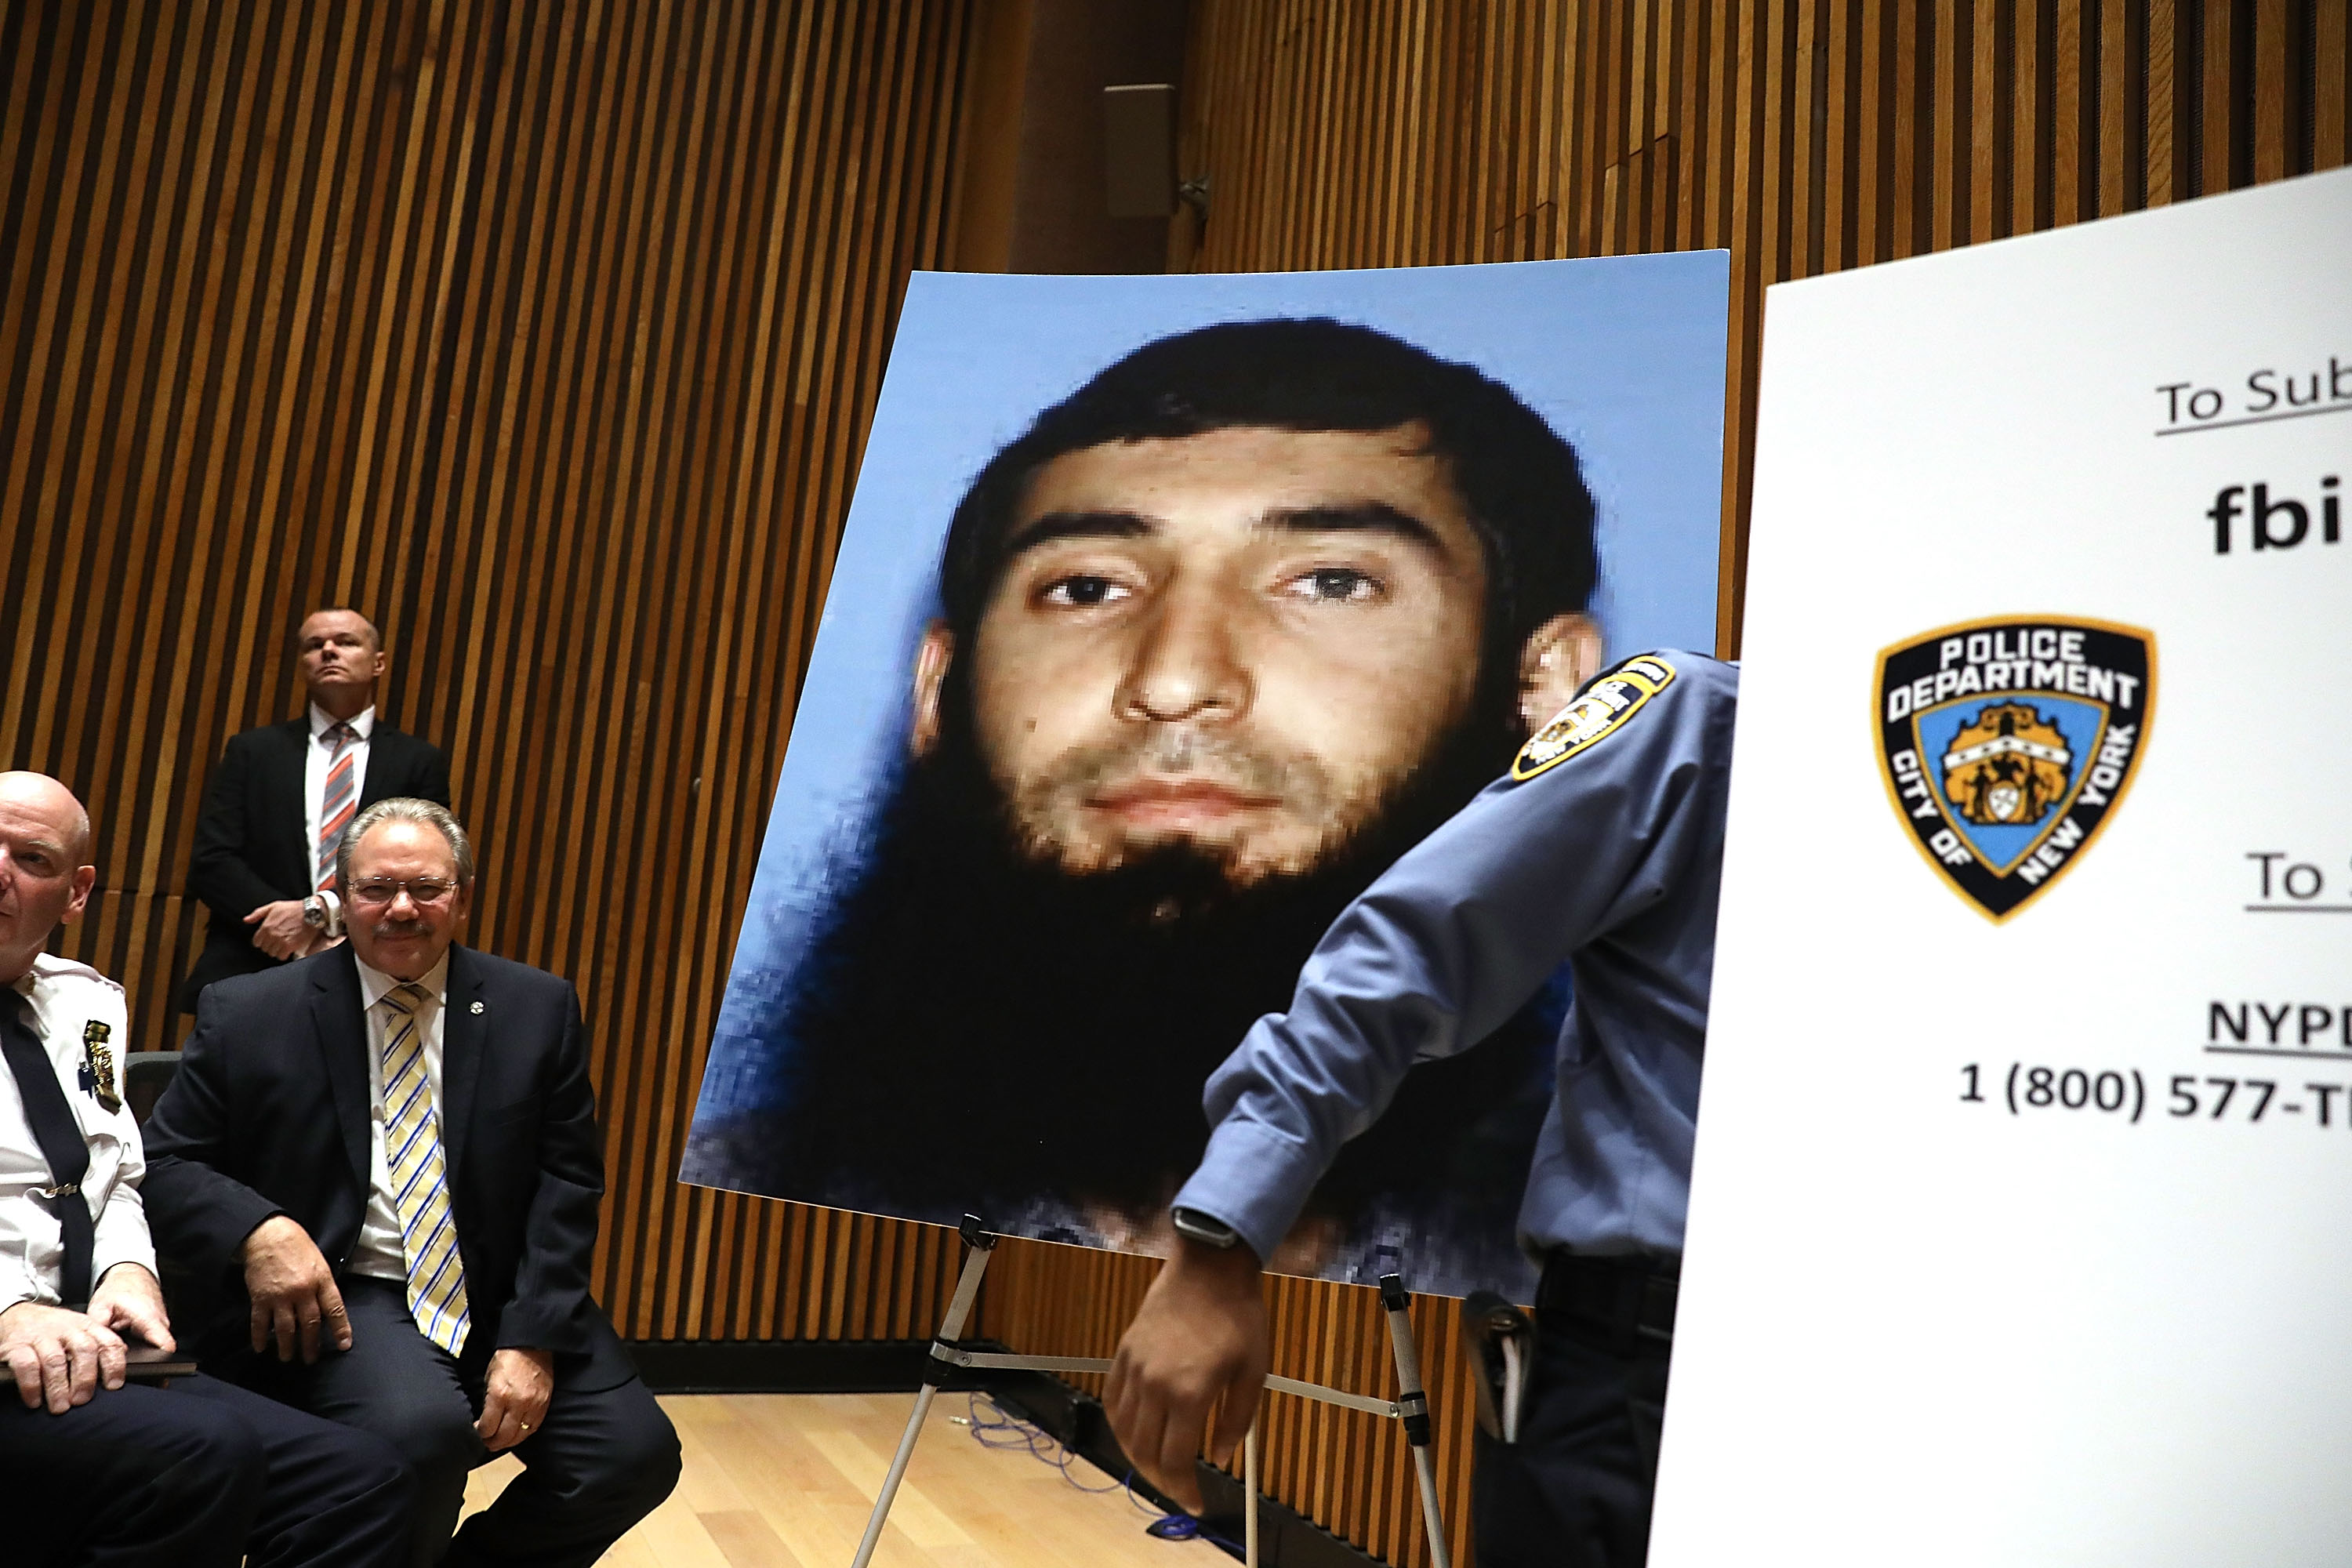 A picture of suspect Sayfullo Saipov is displayed during a news conference in 2017.